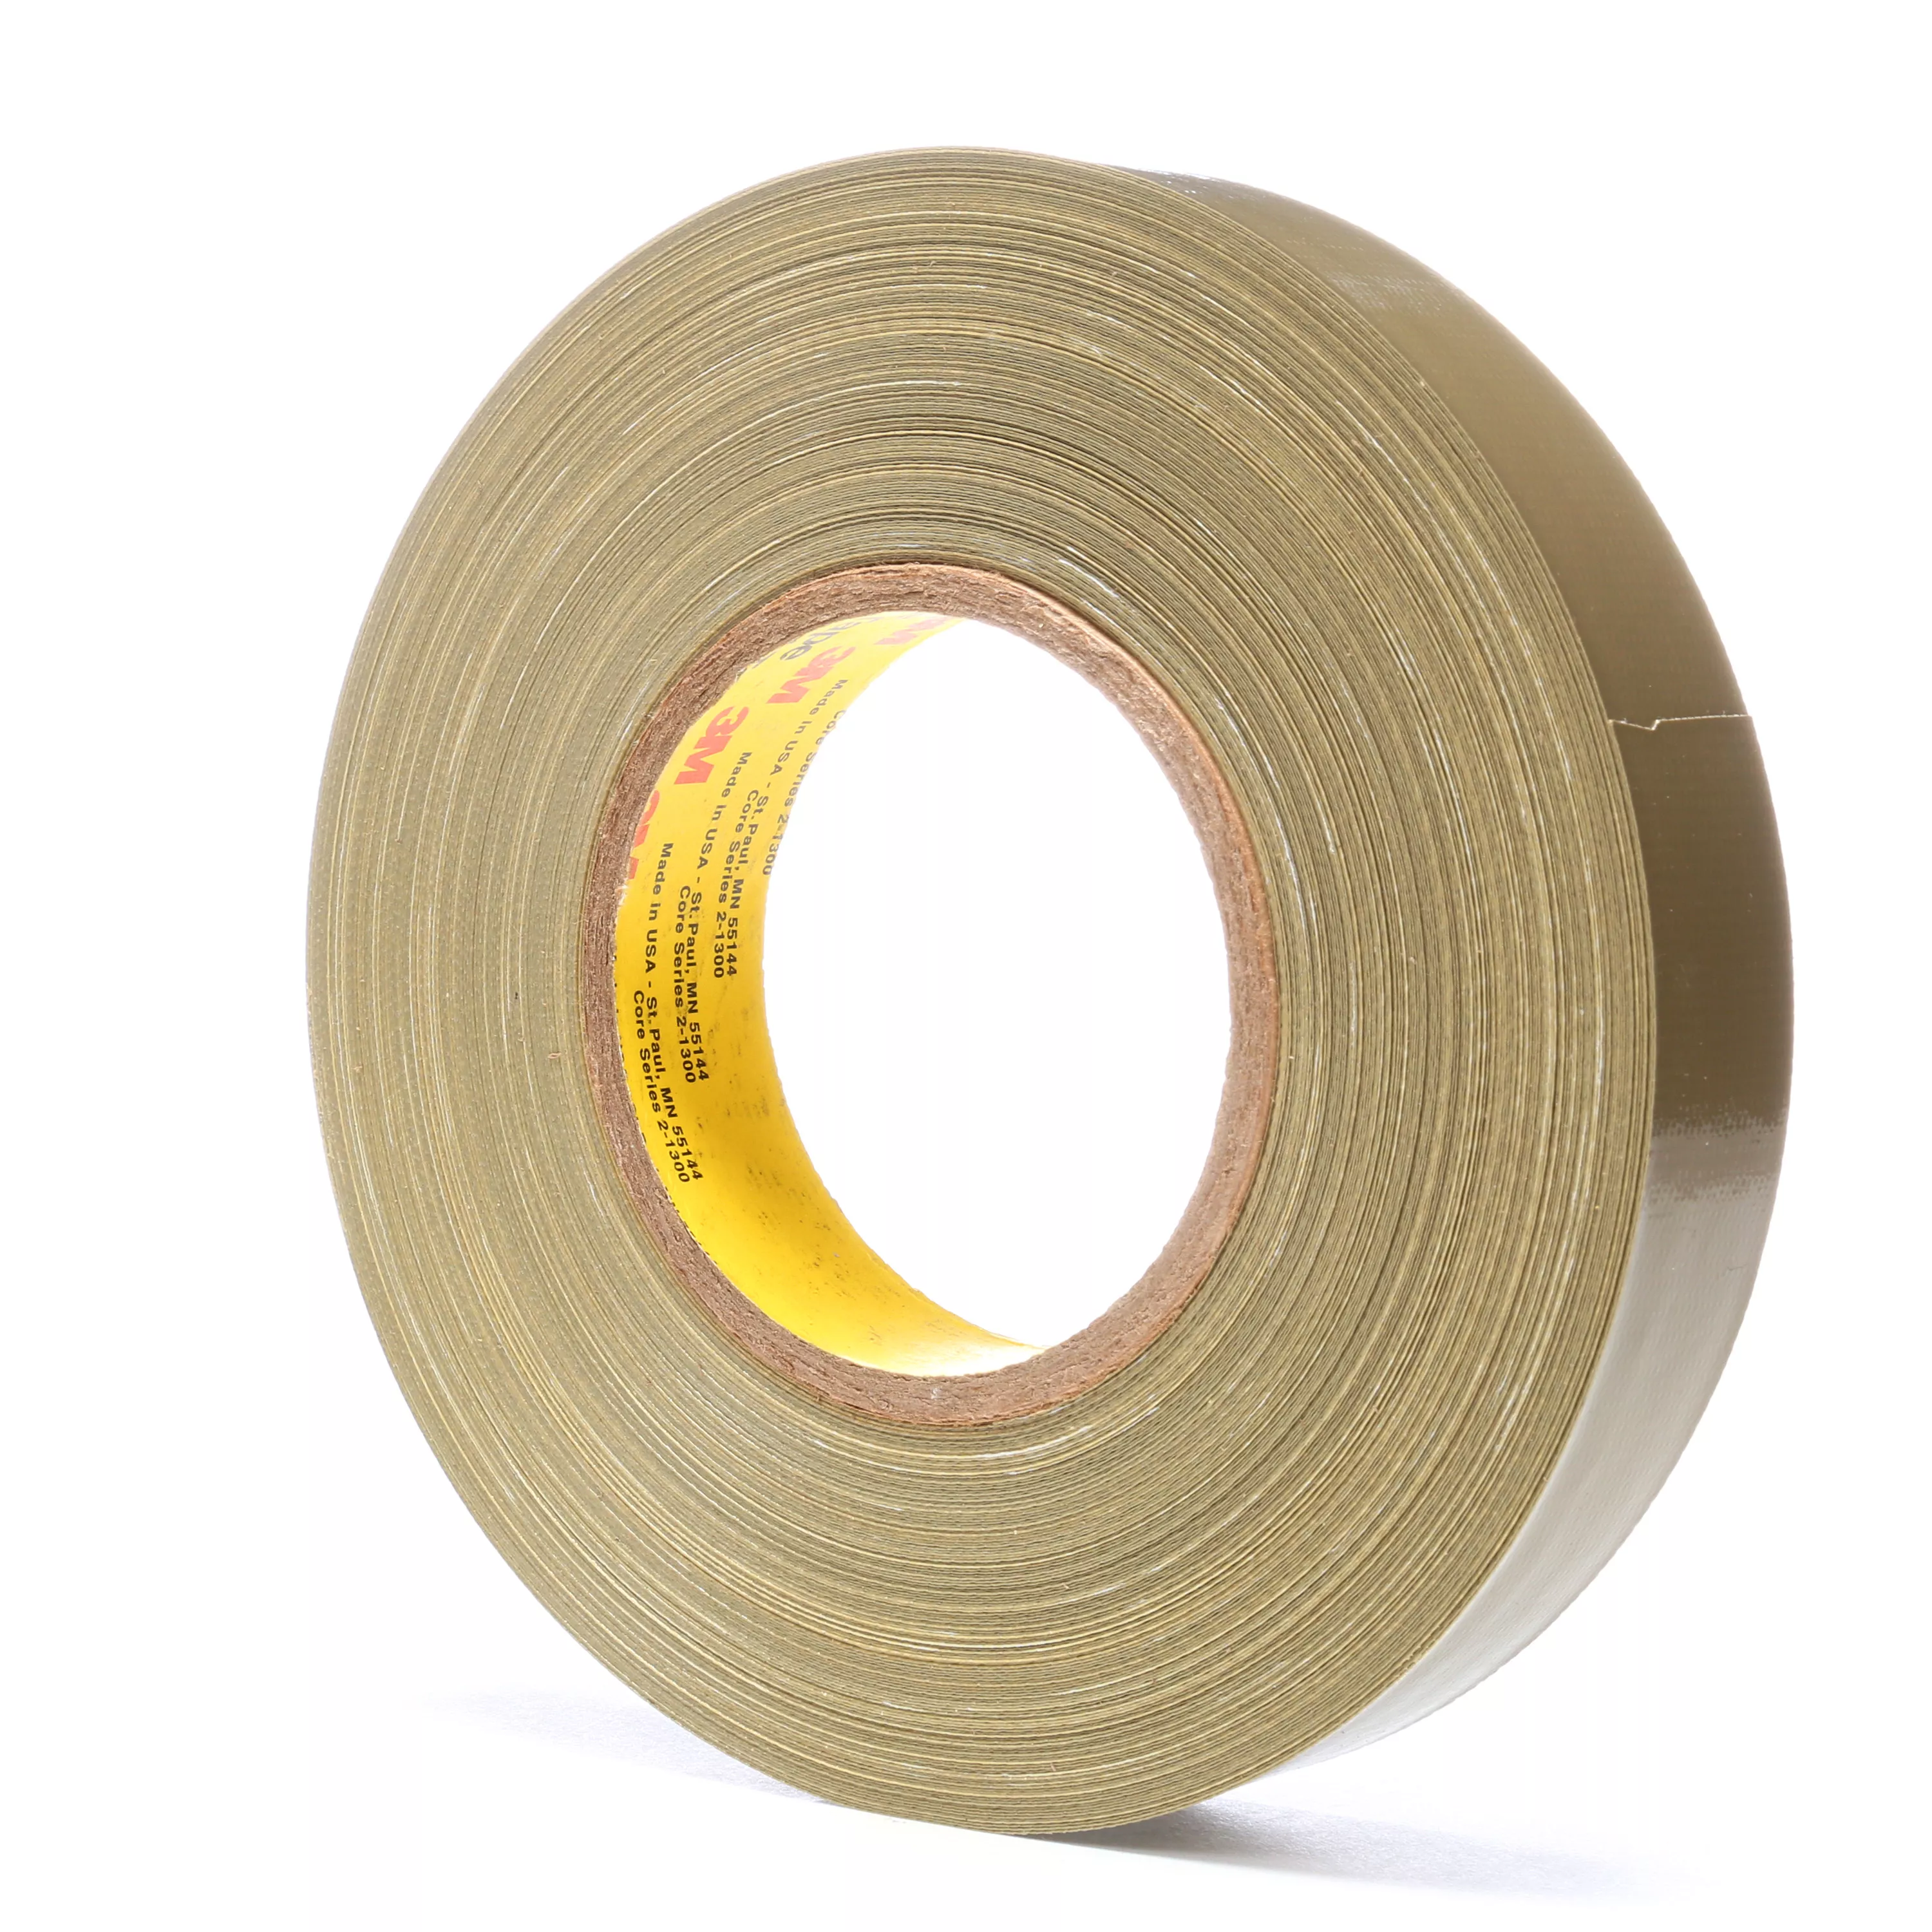 Scotch® Polyethylene Coated Cloth Tape 390, Olive, 1 in x 60 yd, 11.7
mil, 36/Case